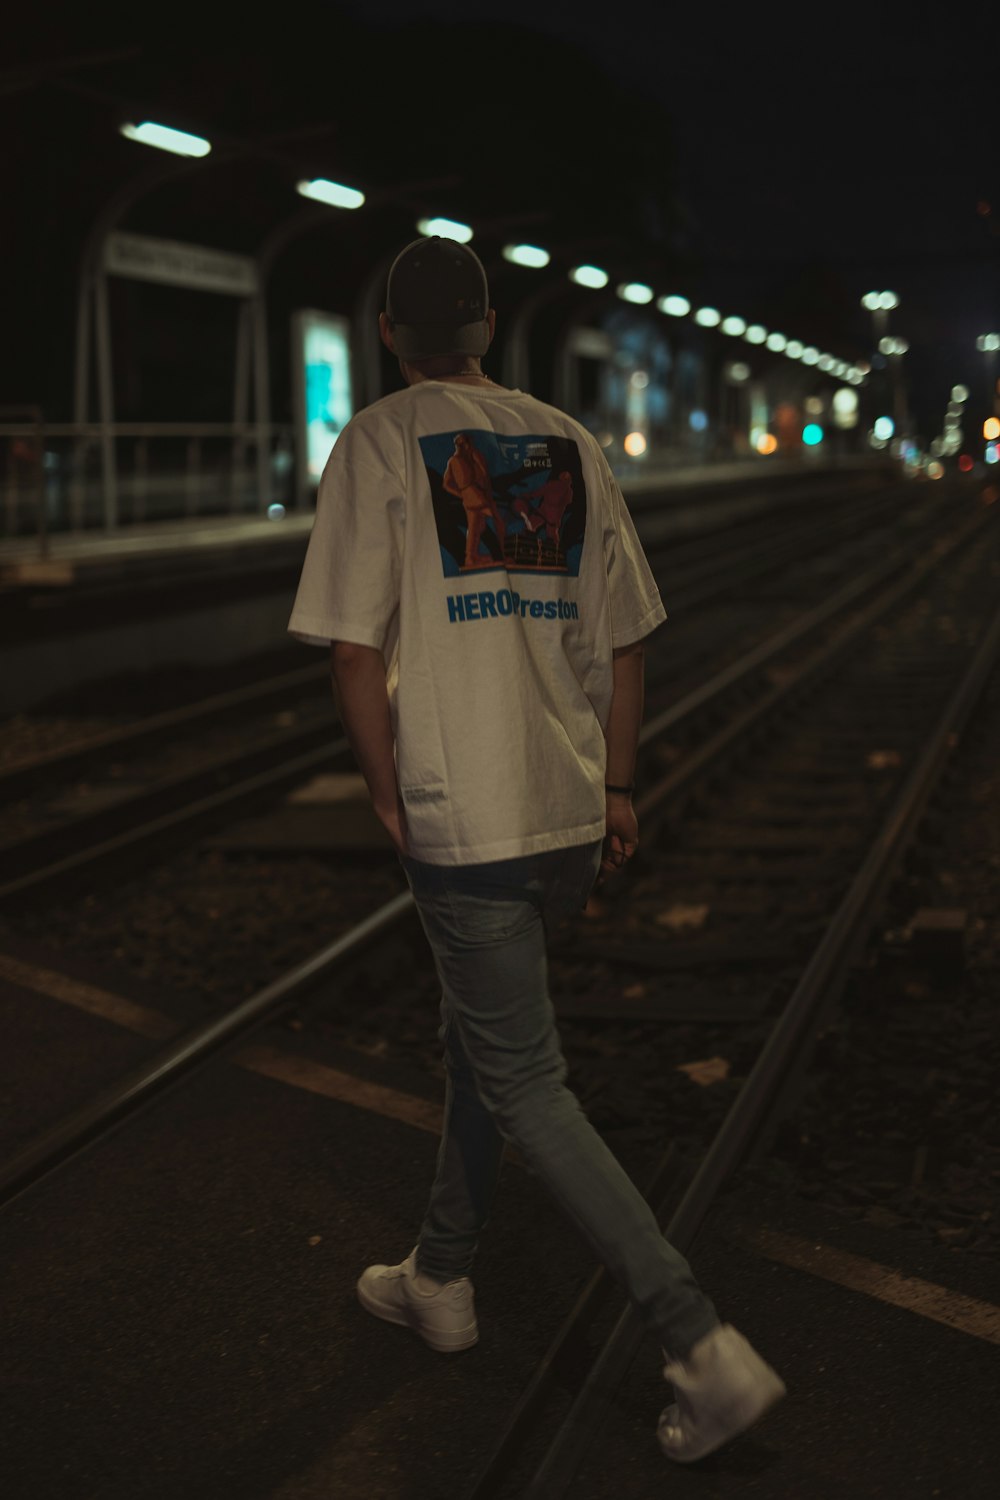 man in white crew neck t-shirt standing on train rail during night time